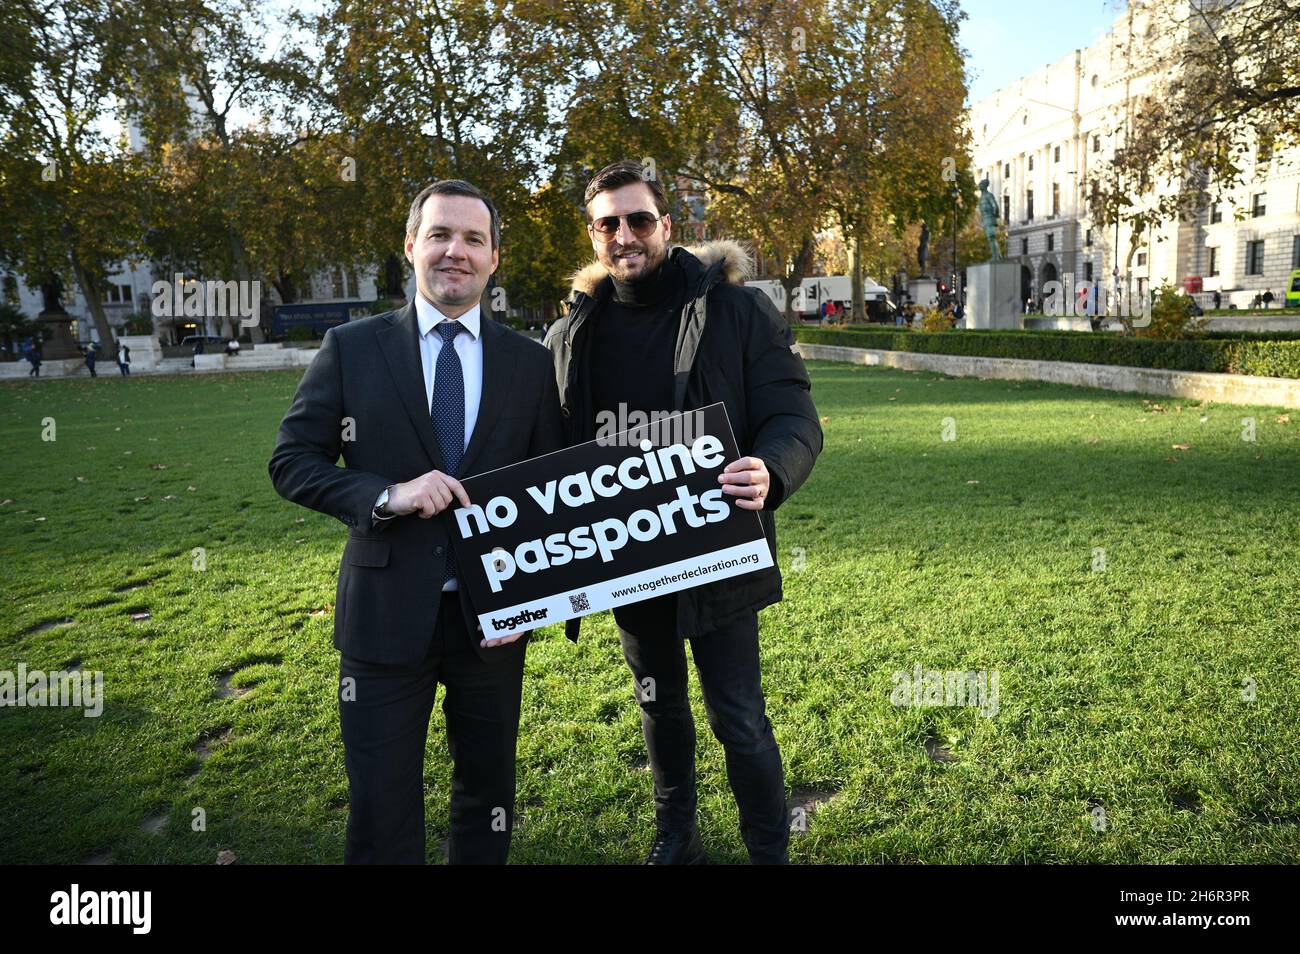 London, UK. 17 November 2021, Chris Green MP support people should have Freedom of Choice against Vaccine Passports - No jab, no job, No jab, no travel is totall wrong against fundamental human rights in Parliament Square, 17 November 2021, London, UK. Stock Photo